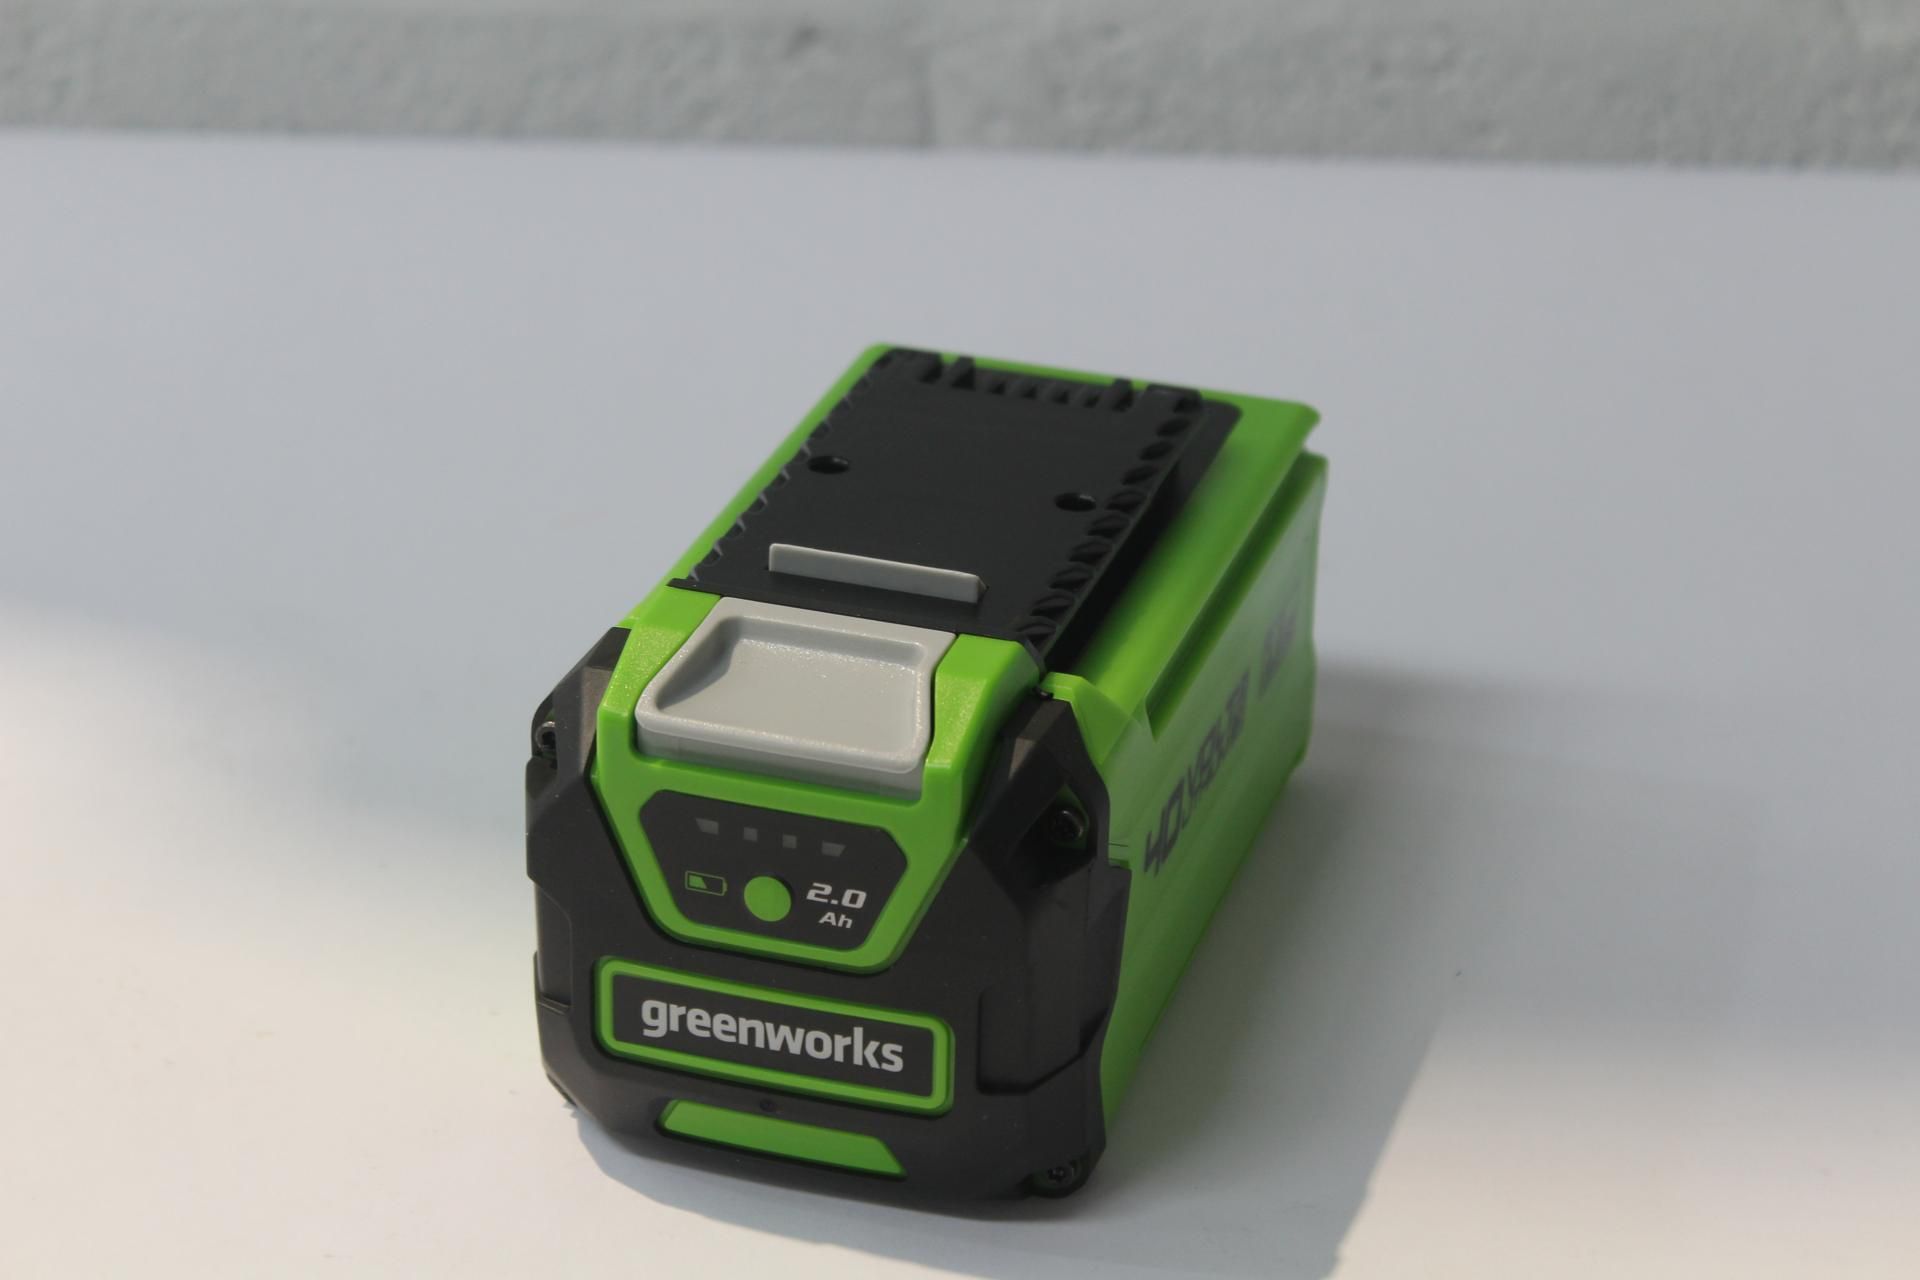 A GreenWorks 40 Volt 2AH rechargeable battery (Unboxed).